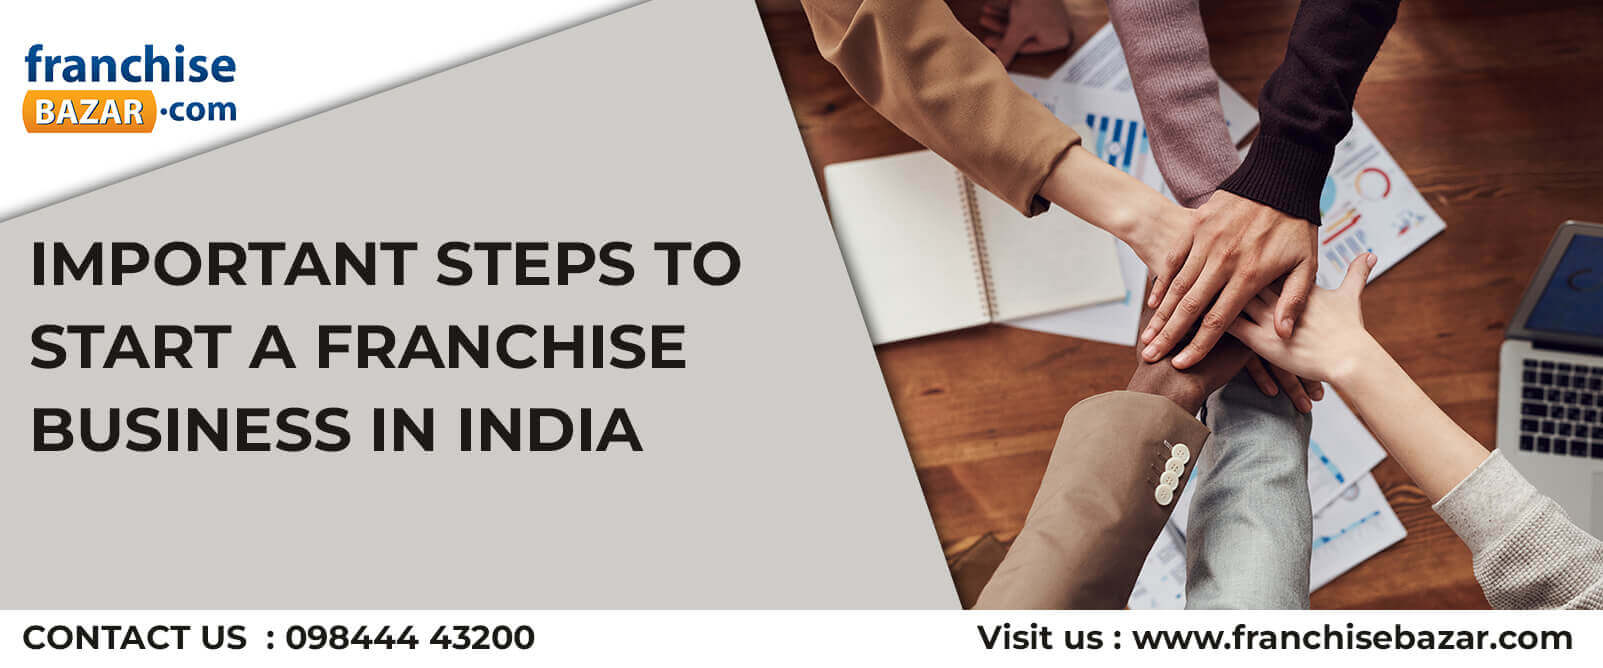 Franchise opportunity in India